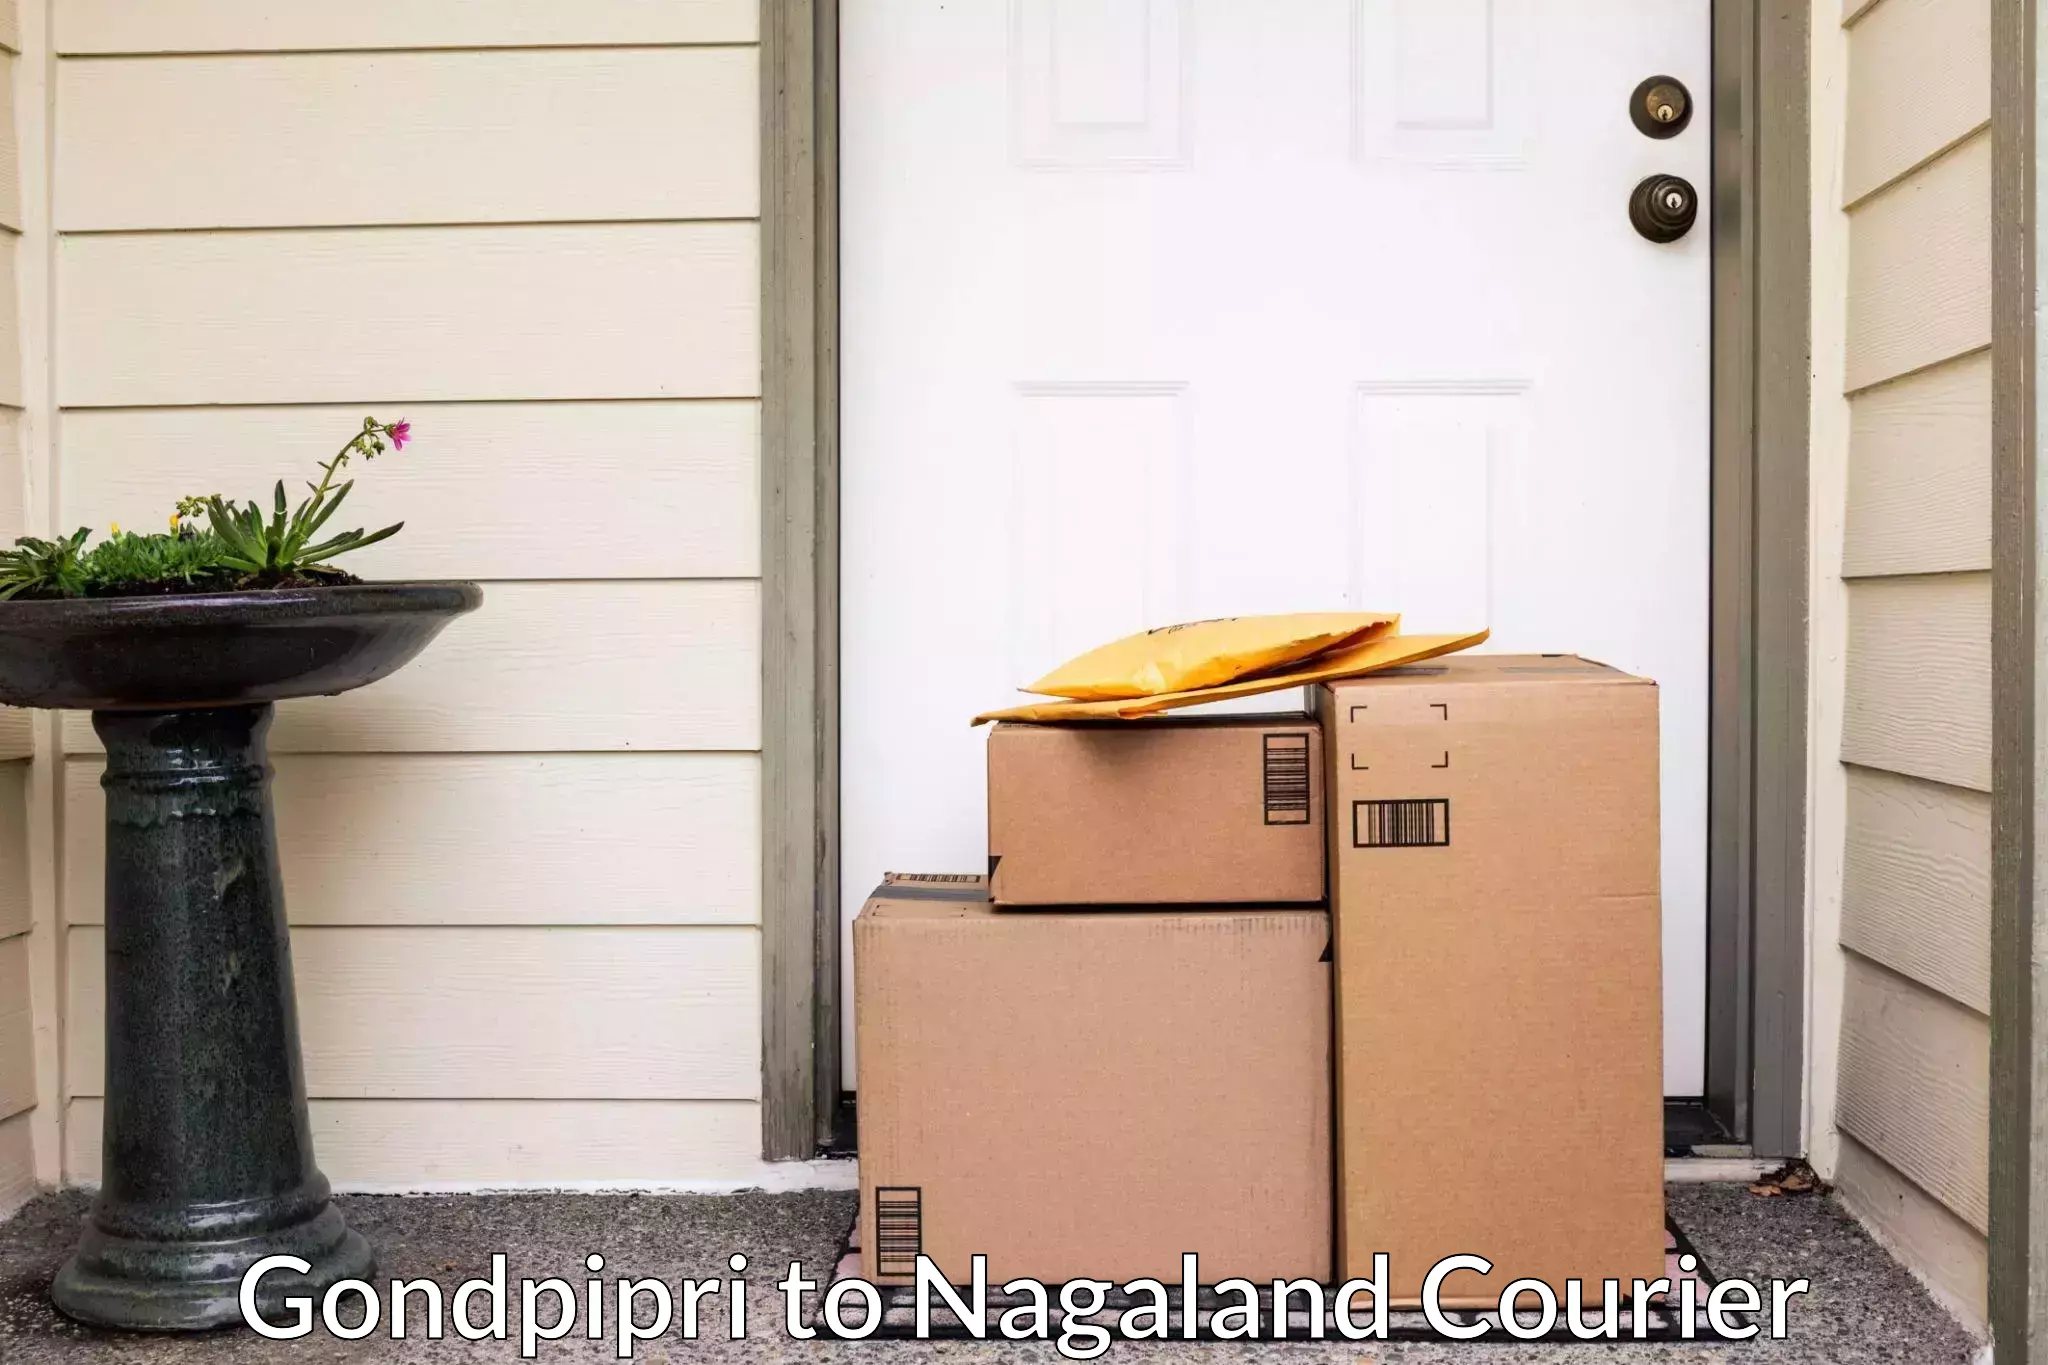 Hassle-free relocation Gondpipri to NIT Nagaland